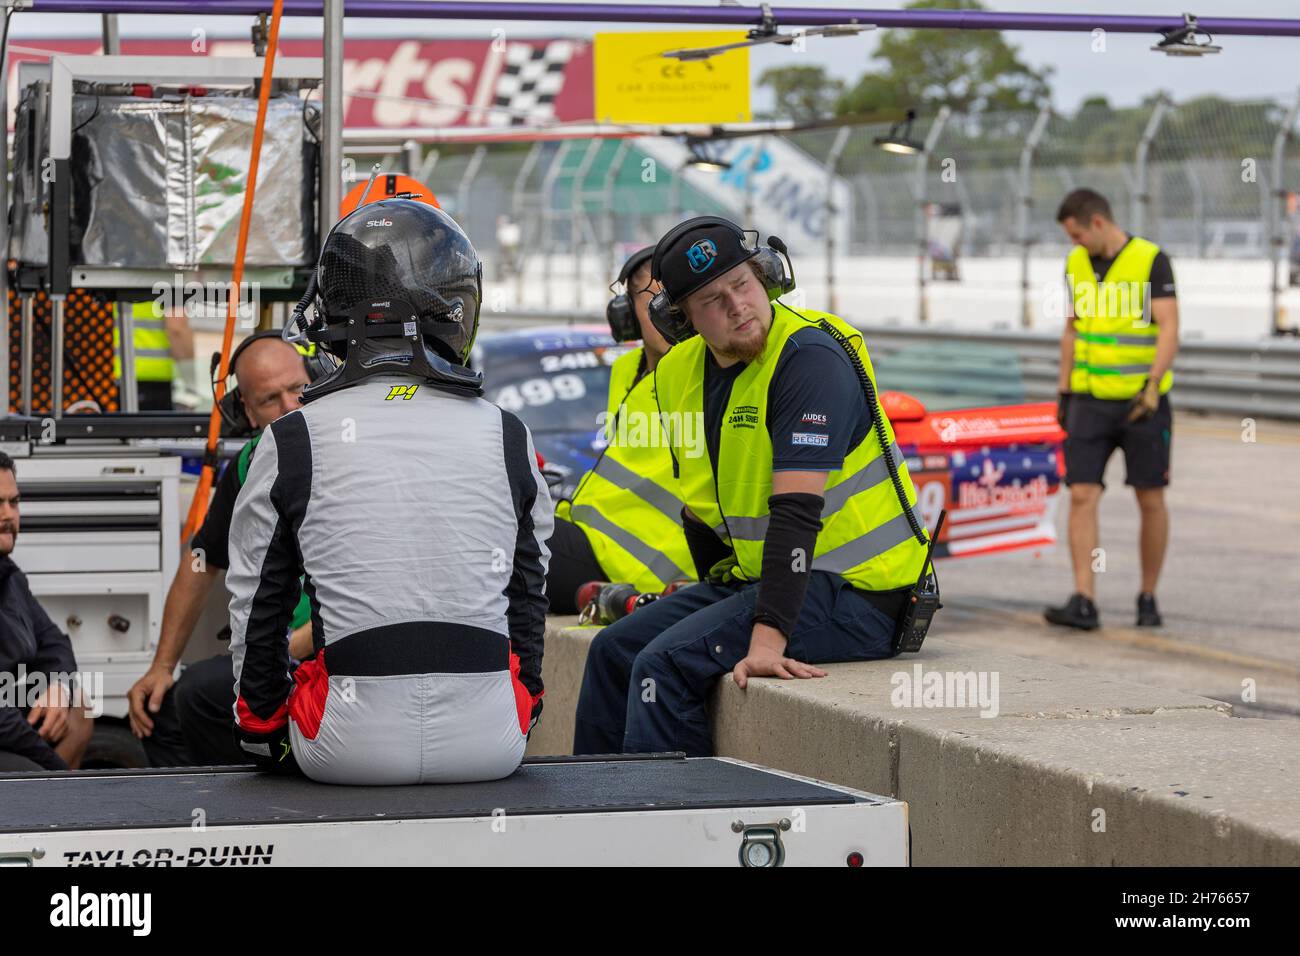 Sebring, USA. 19th Nov, 2021. Cars Pit Stop during 24H Series powered by Hankook. Schedule includes USA stops on November 19-21, 2021. Racing cars from the many countries, such as: Germany, USA, France, Nederland, Romania, Denmark, Canada, Spain, Great Britain, Italy; in many different classes: GT4, 991, GTX, GT3, TCR, TCX, P4. (Photo by Yaroslav Sabitov/YES Market Media/Sipa USA) Credit: Sipa USA/Alamy Live News Stock Photo